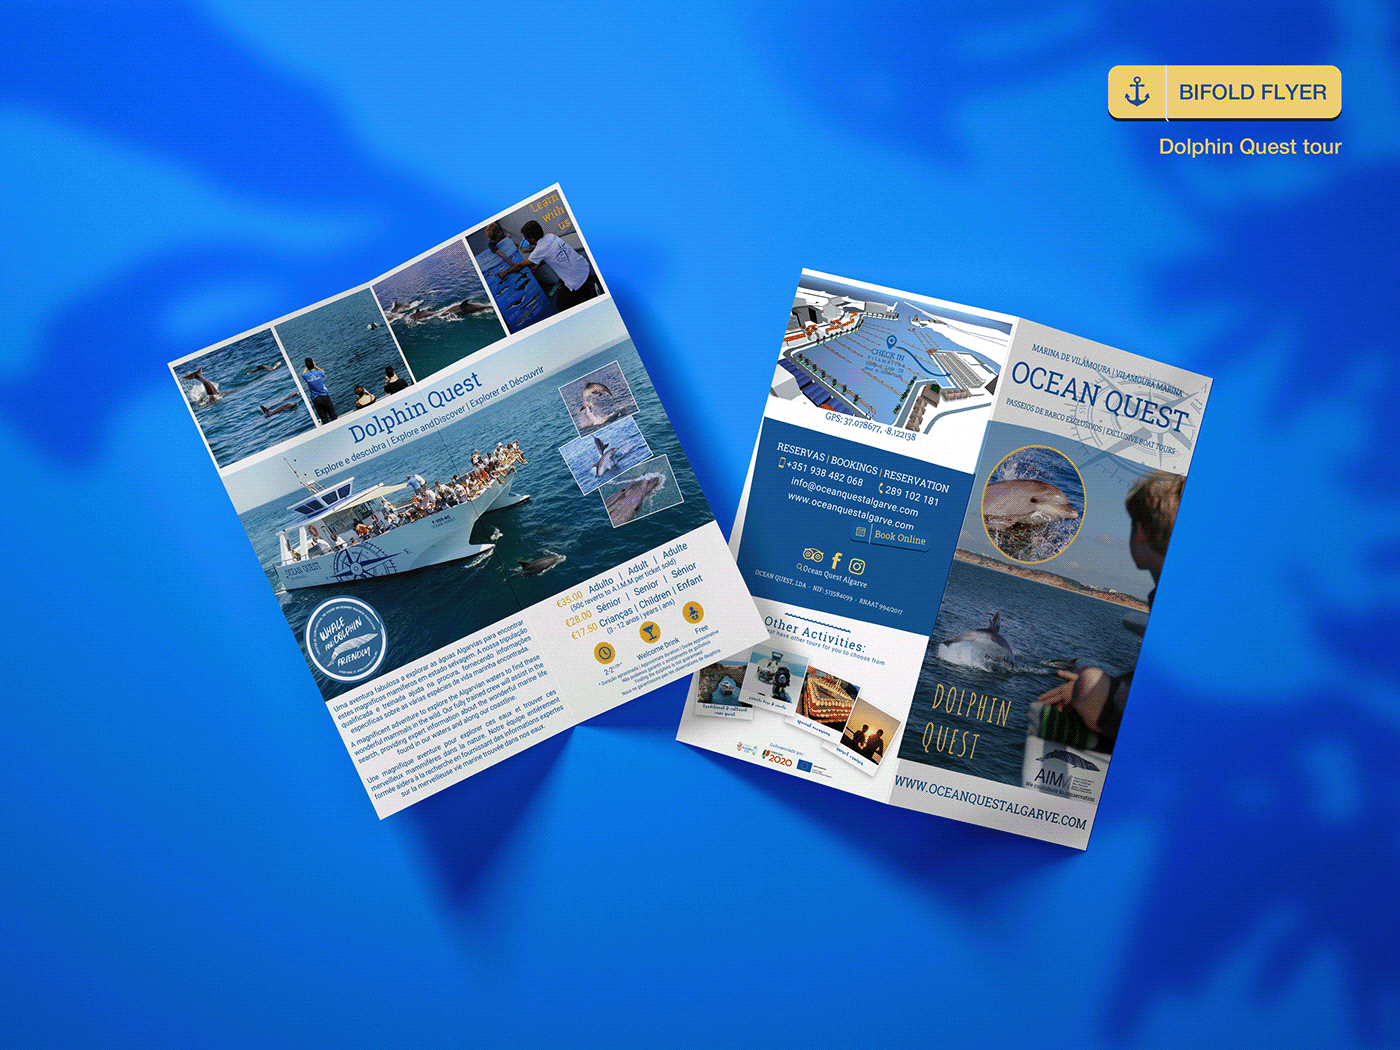 Advertising  Boat Party Boat Trips Cave exploration coastline Dolphins flyers responsive website sea tourism